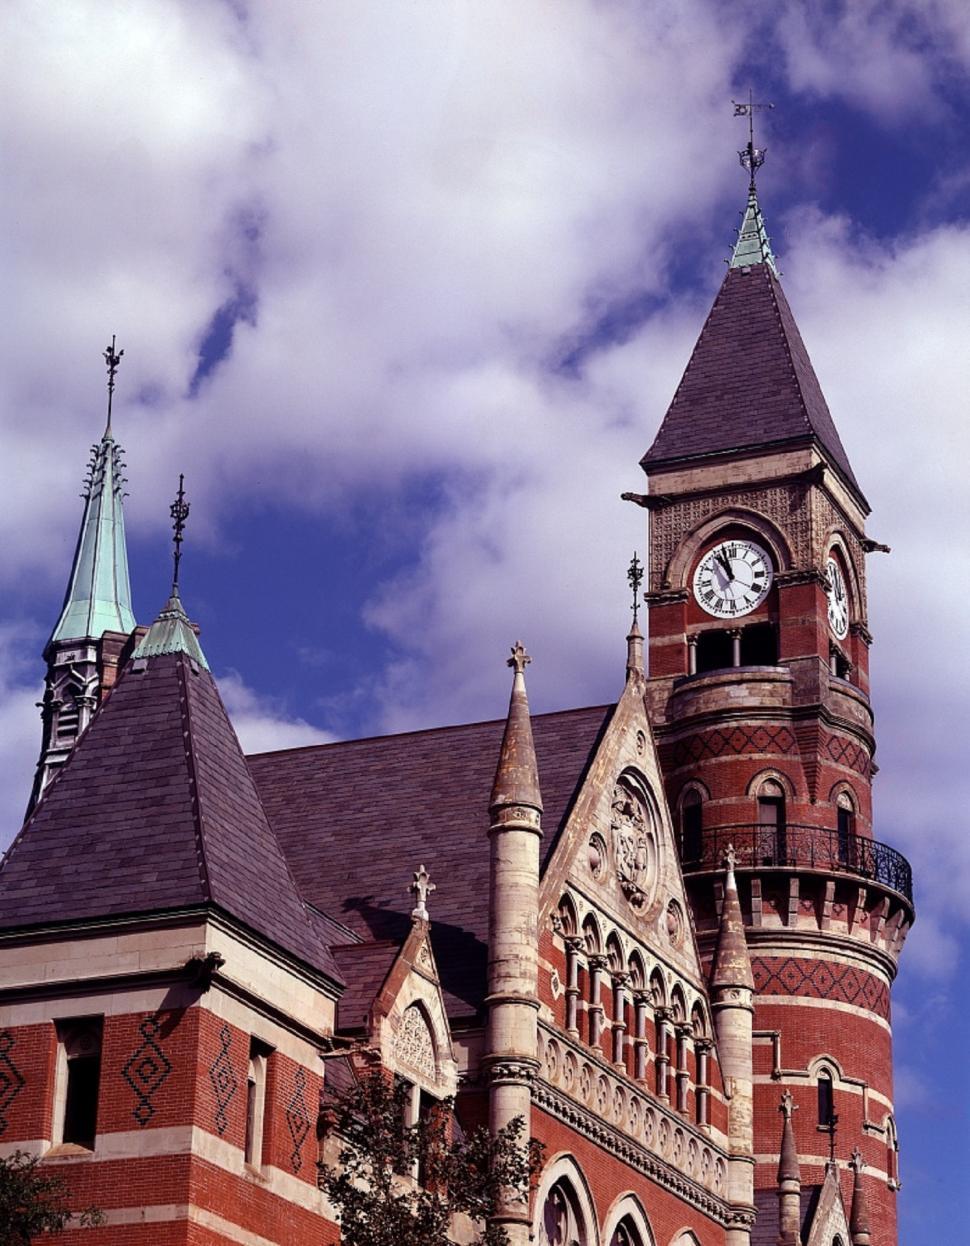 Free Image of Historic Brick Building With Clock Tower 